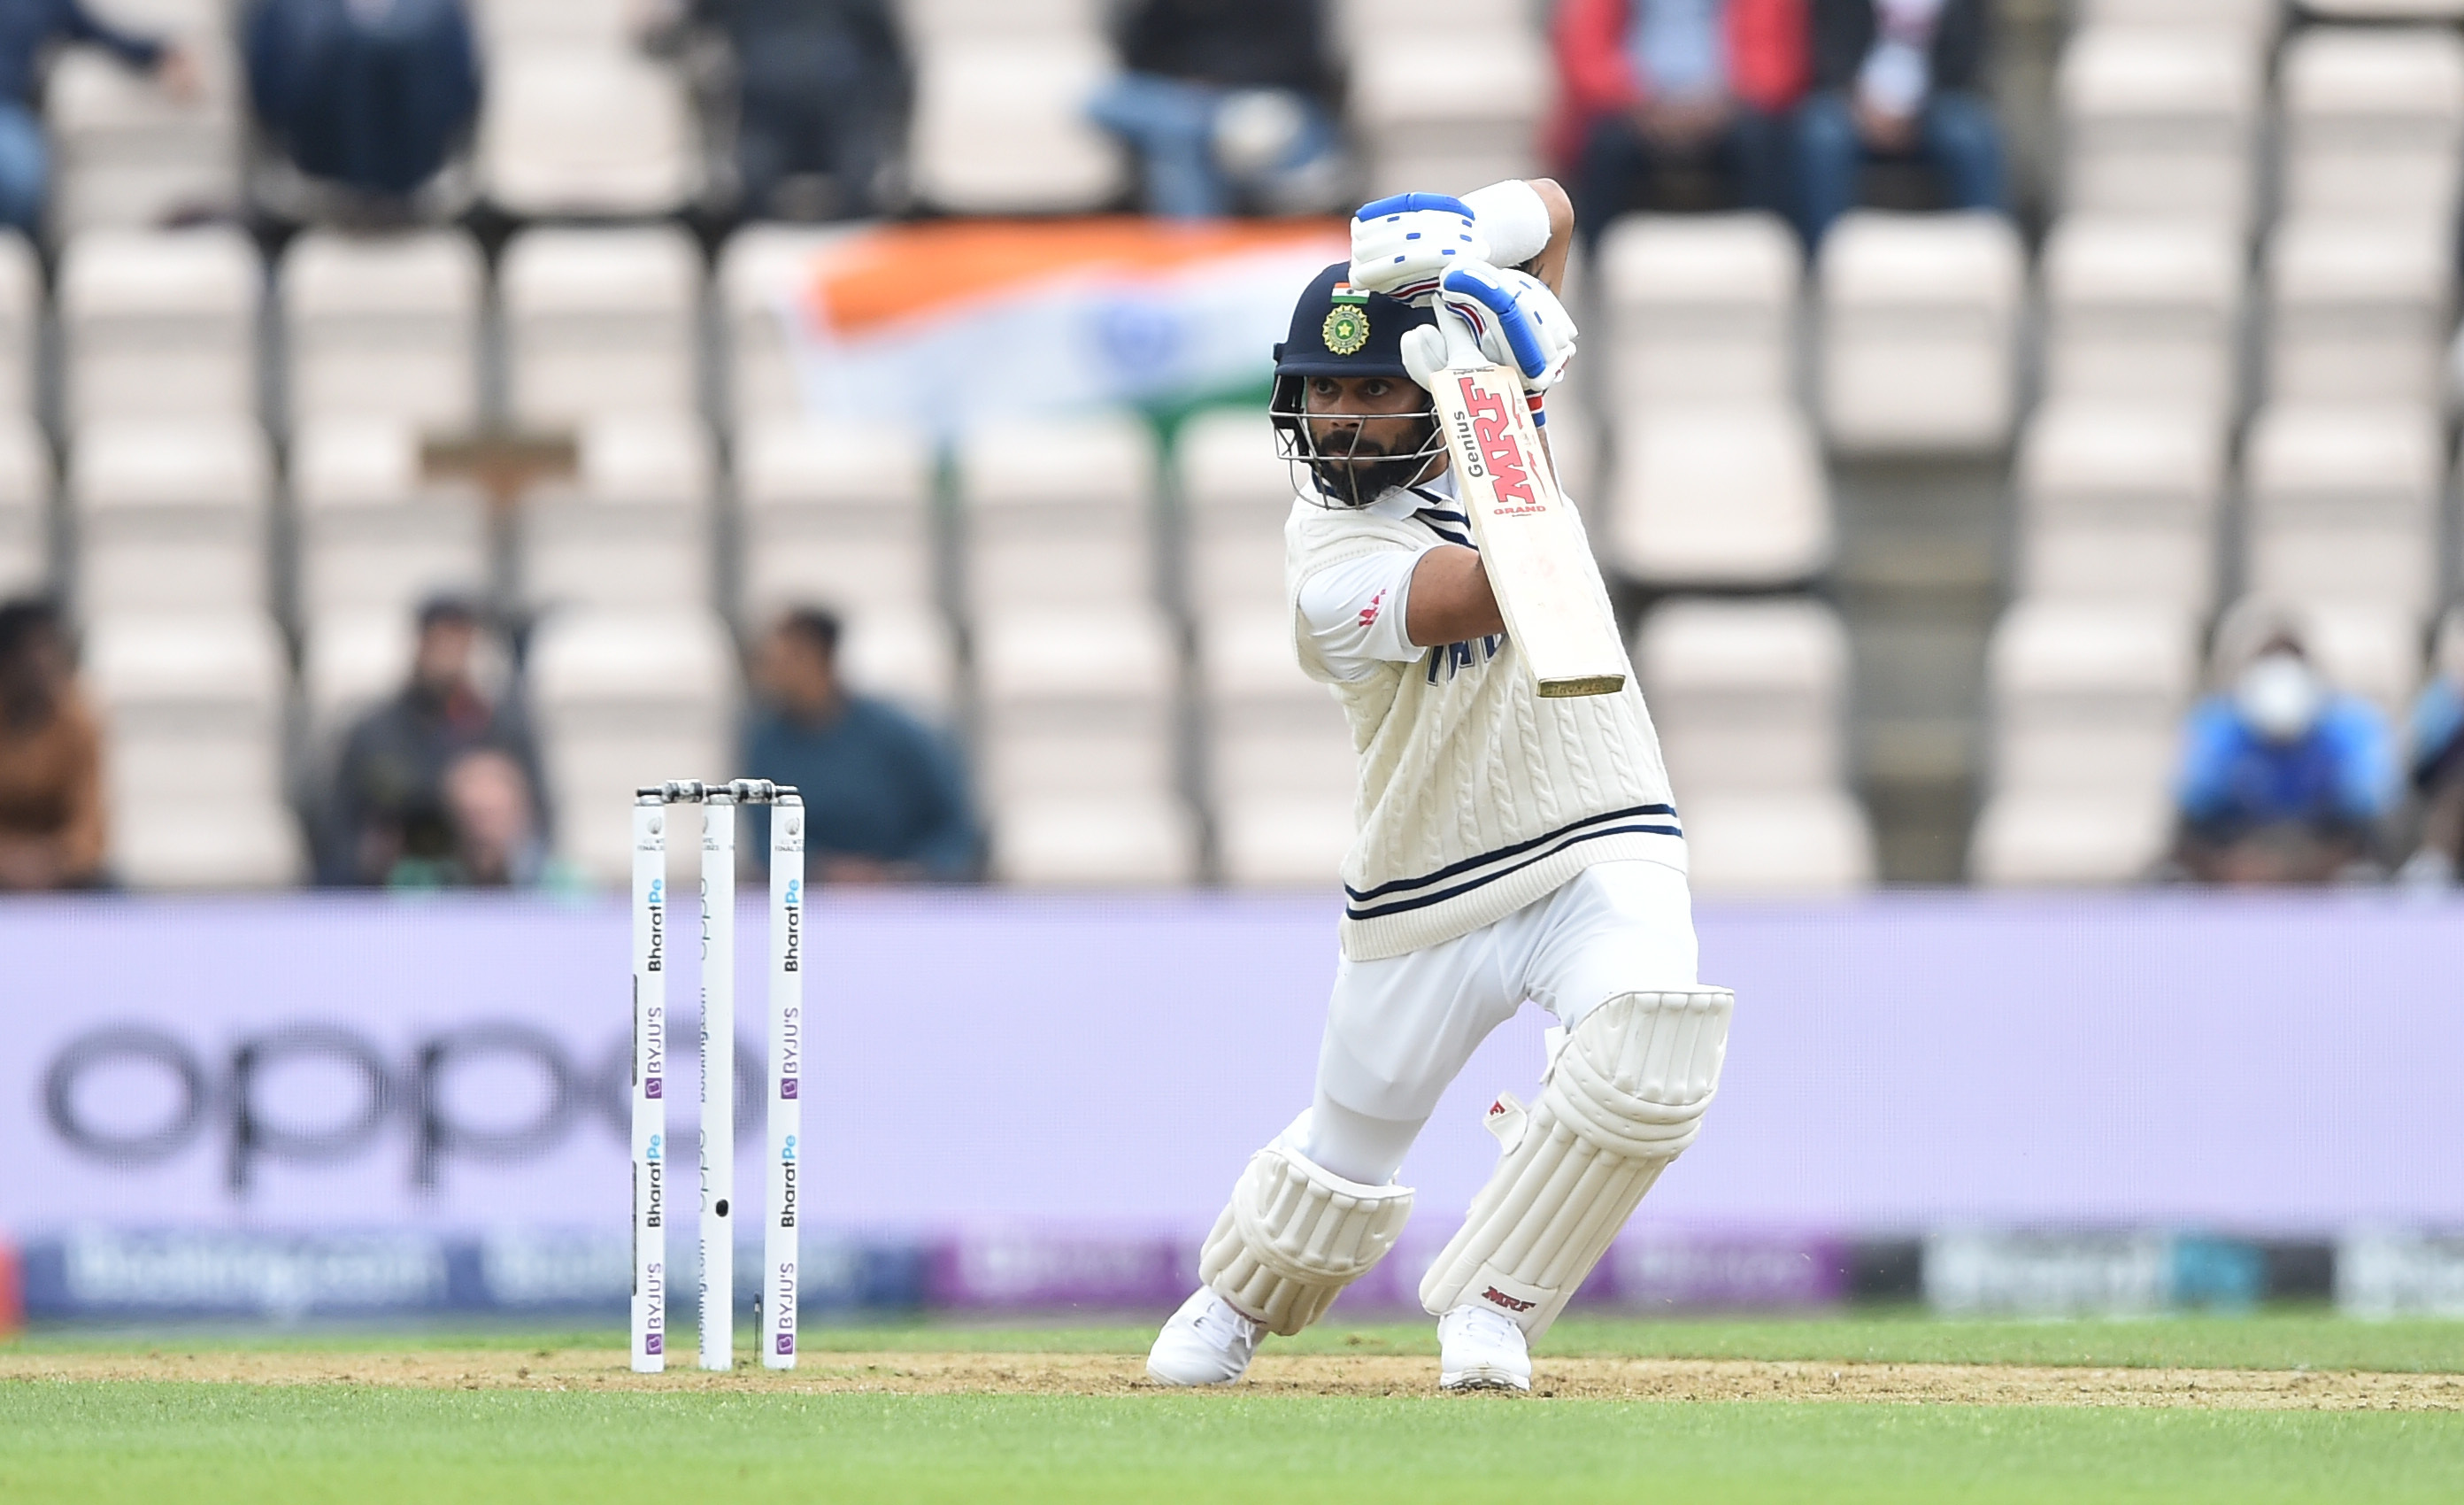 IND vs SL 2022 | Virat Kohli look to join an elite list by scoring century in his 100th Test